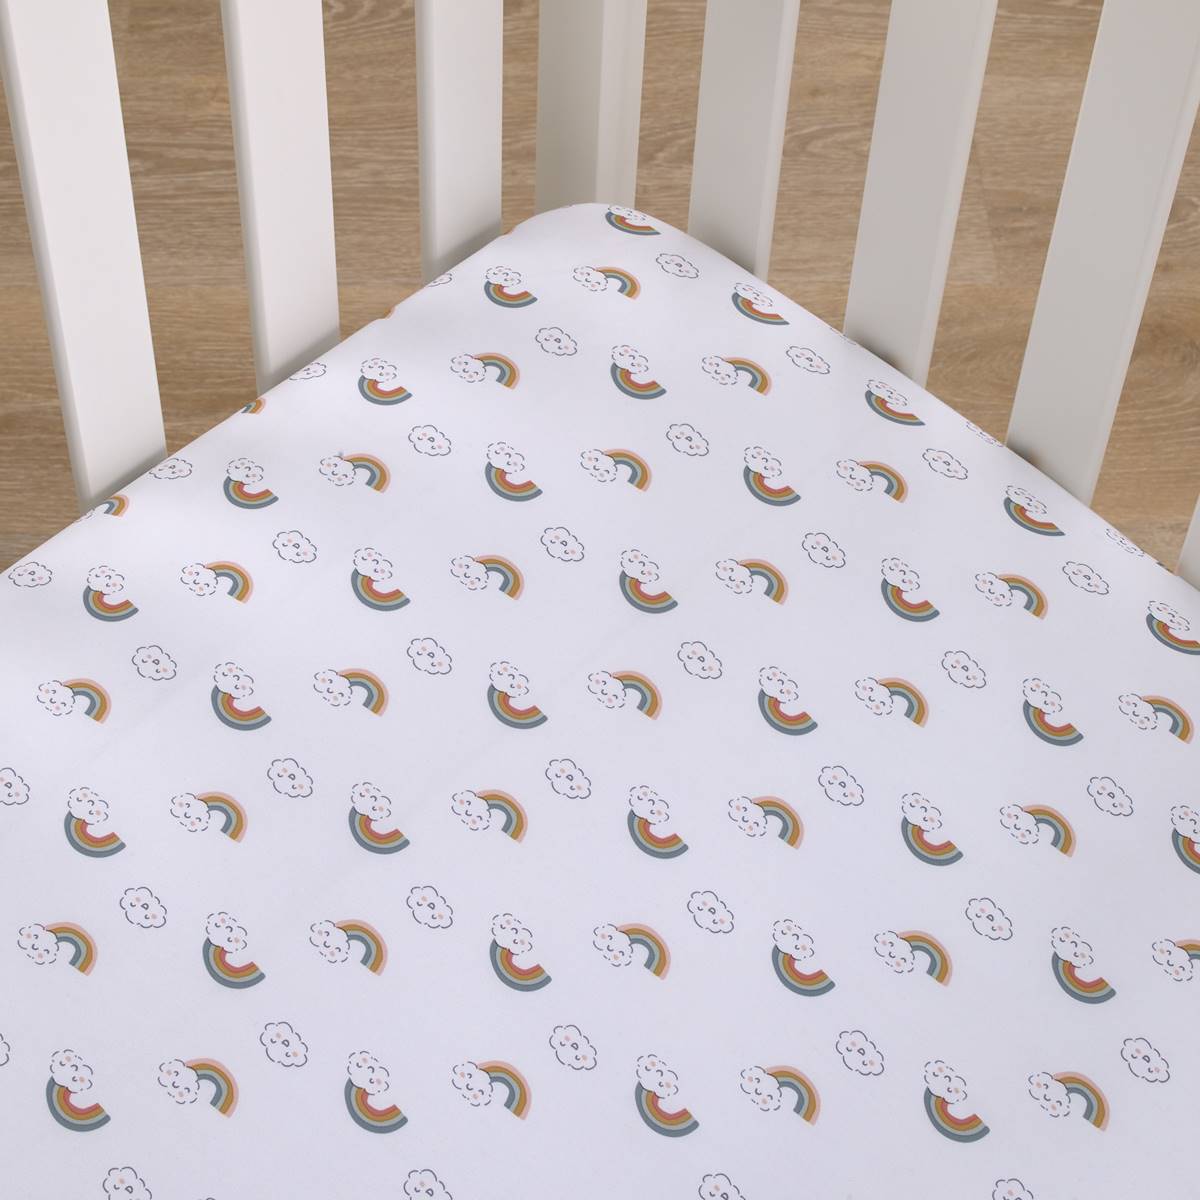 Carters(R) Chasing Rainbows Super Soft Fitted Crib Sheet